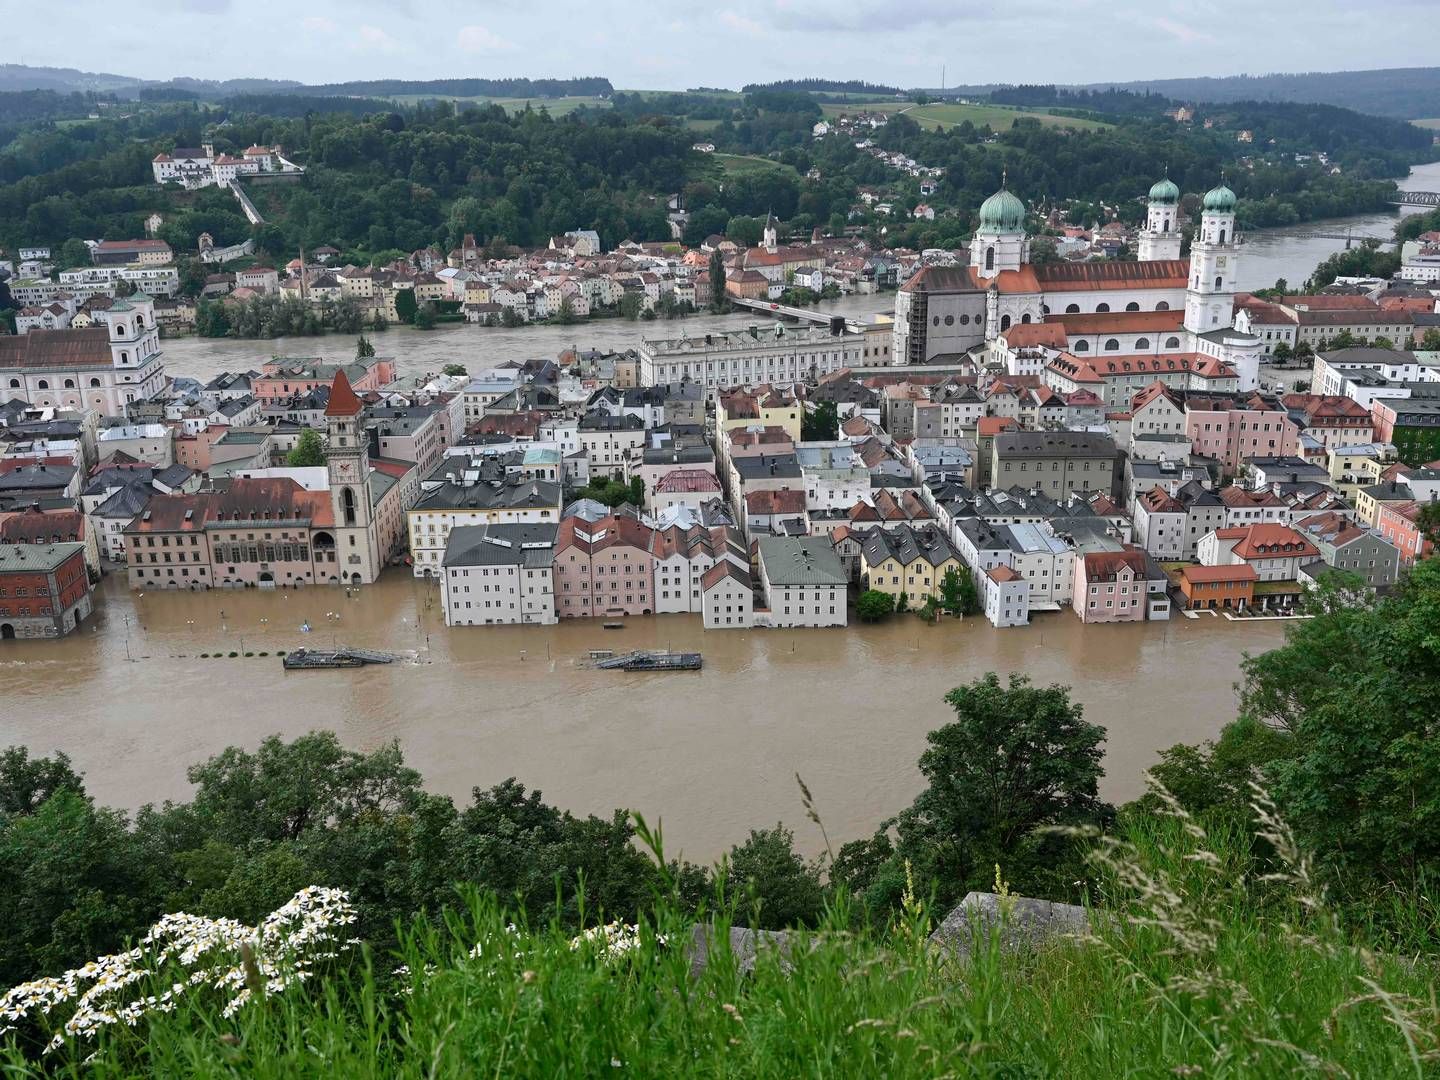 Flooding occurred in Southern Germany due to the high Rhine water levels, which are now back under control.